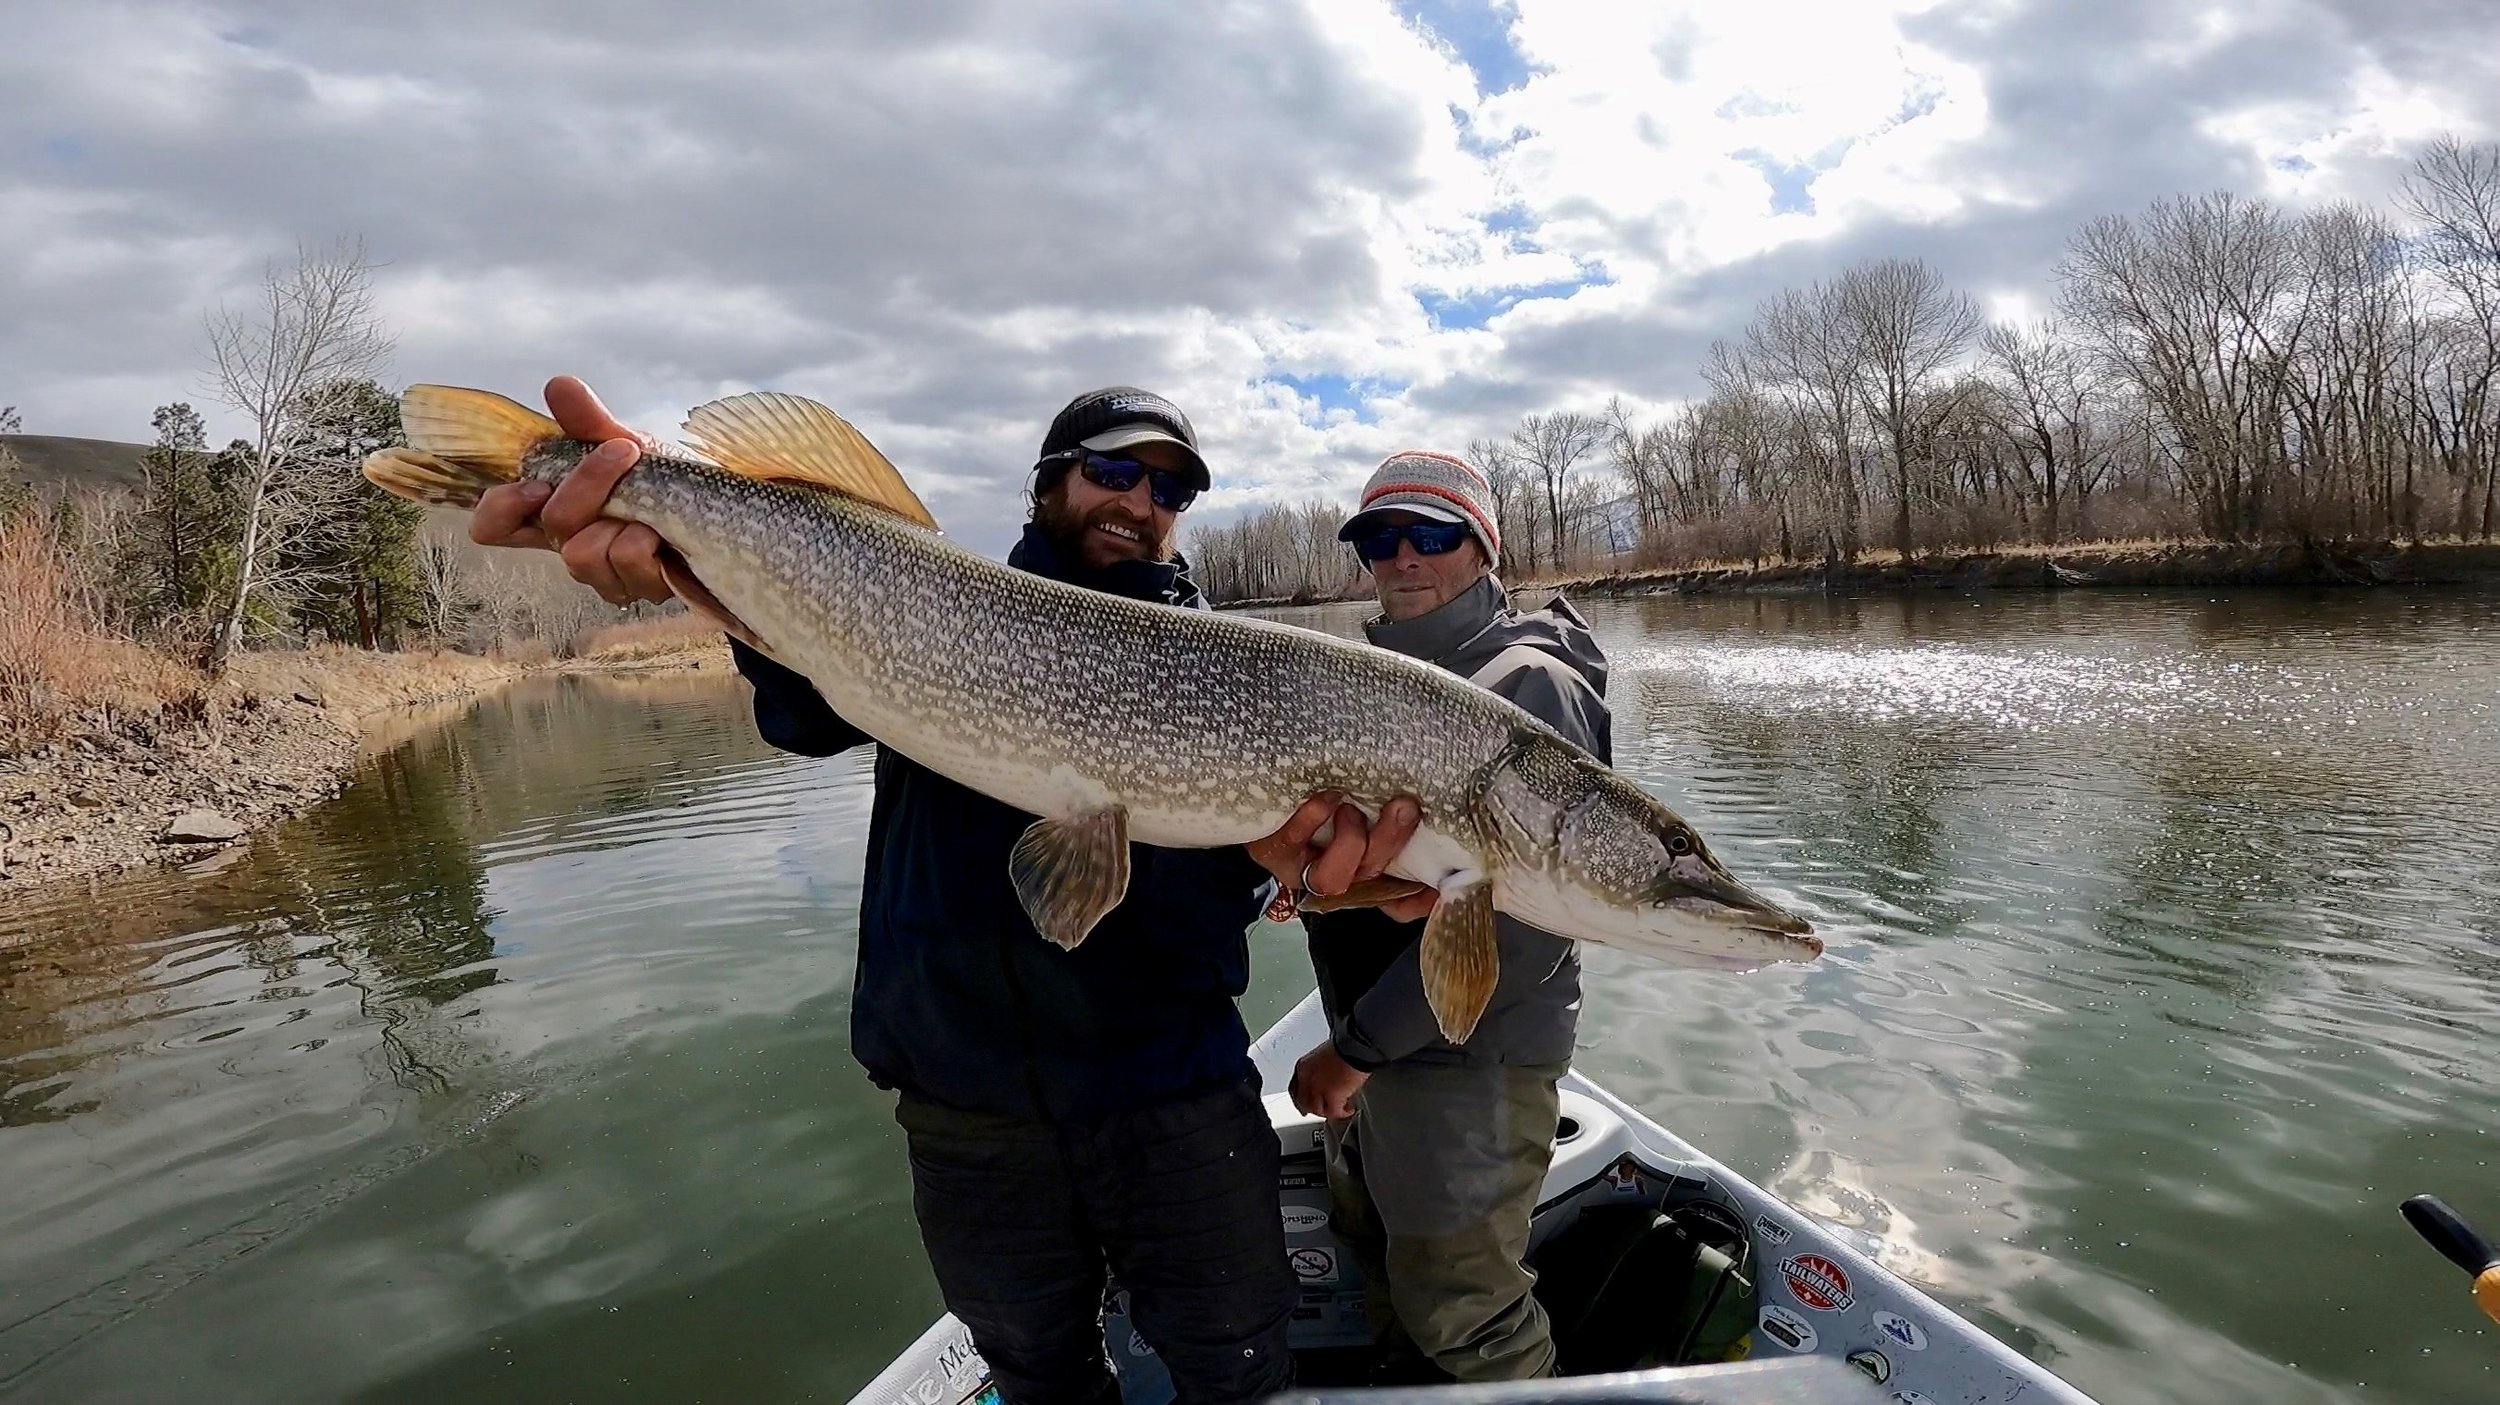 Fly Fishing for Pike